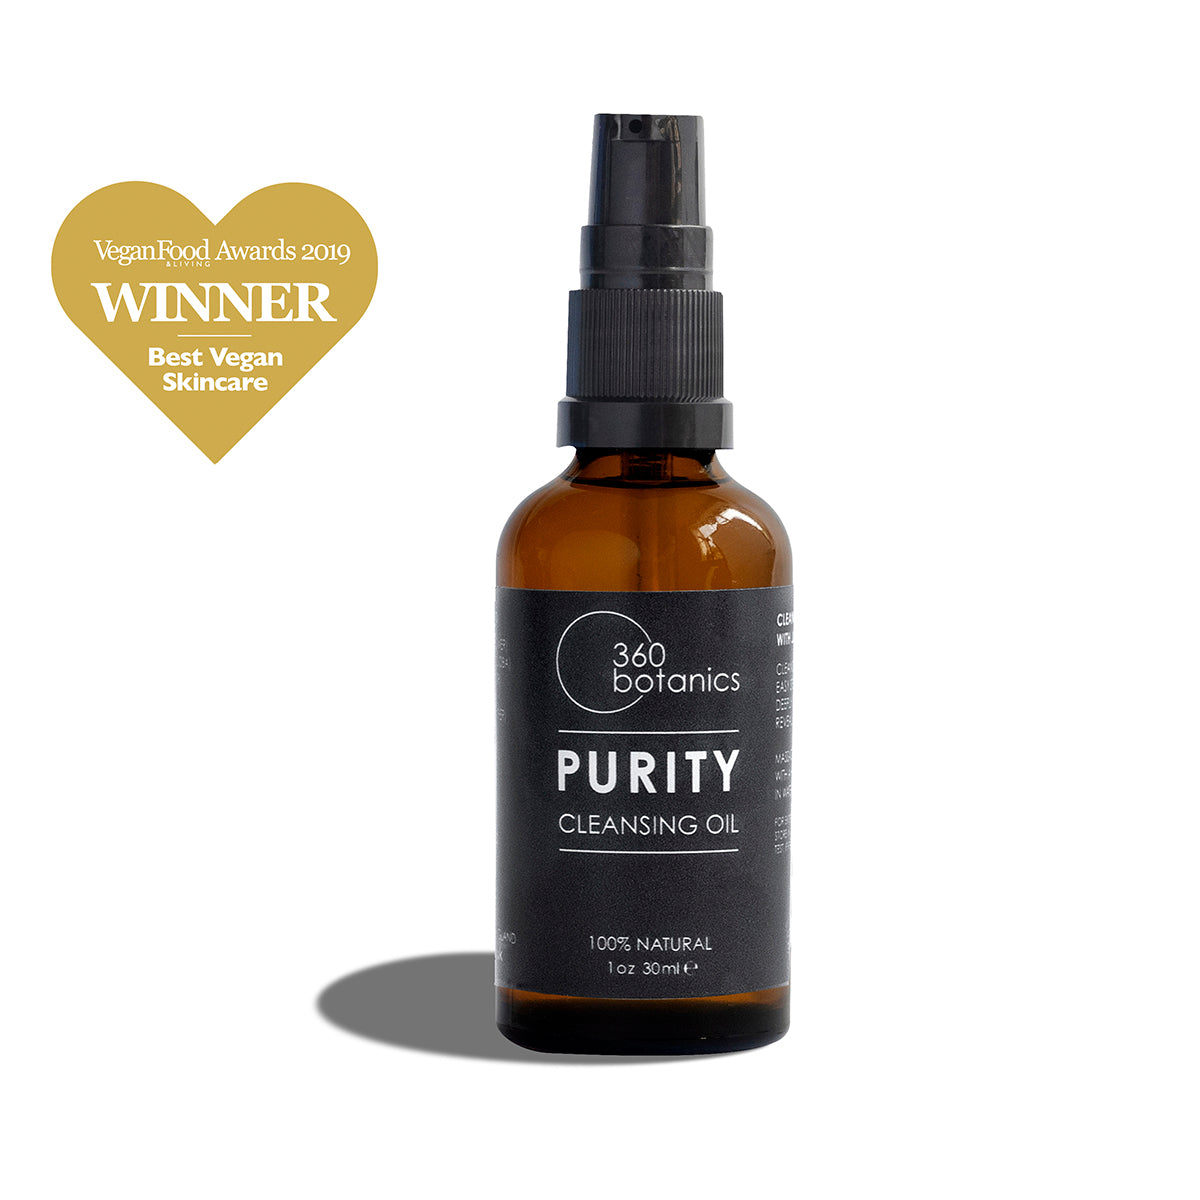 A bottle of 360 Botanics Purity Cleansing Oil, labeled as 100% natural in a 1 oz or 30 ml size with a spray nozzle. Above the bottle is a badge stating "Vegan Food Awards 2019 WINNER Best Vegan Skincare" set against a white background.